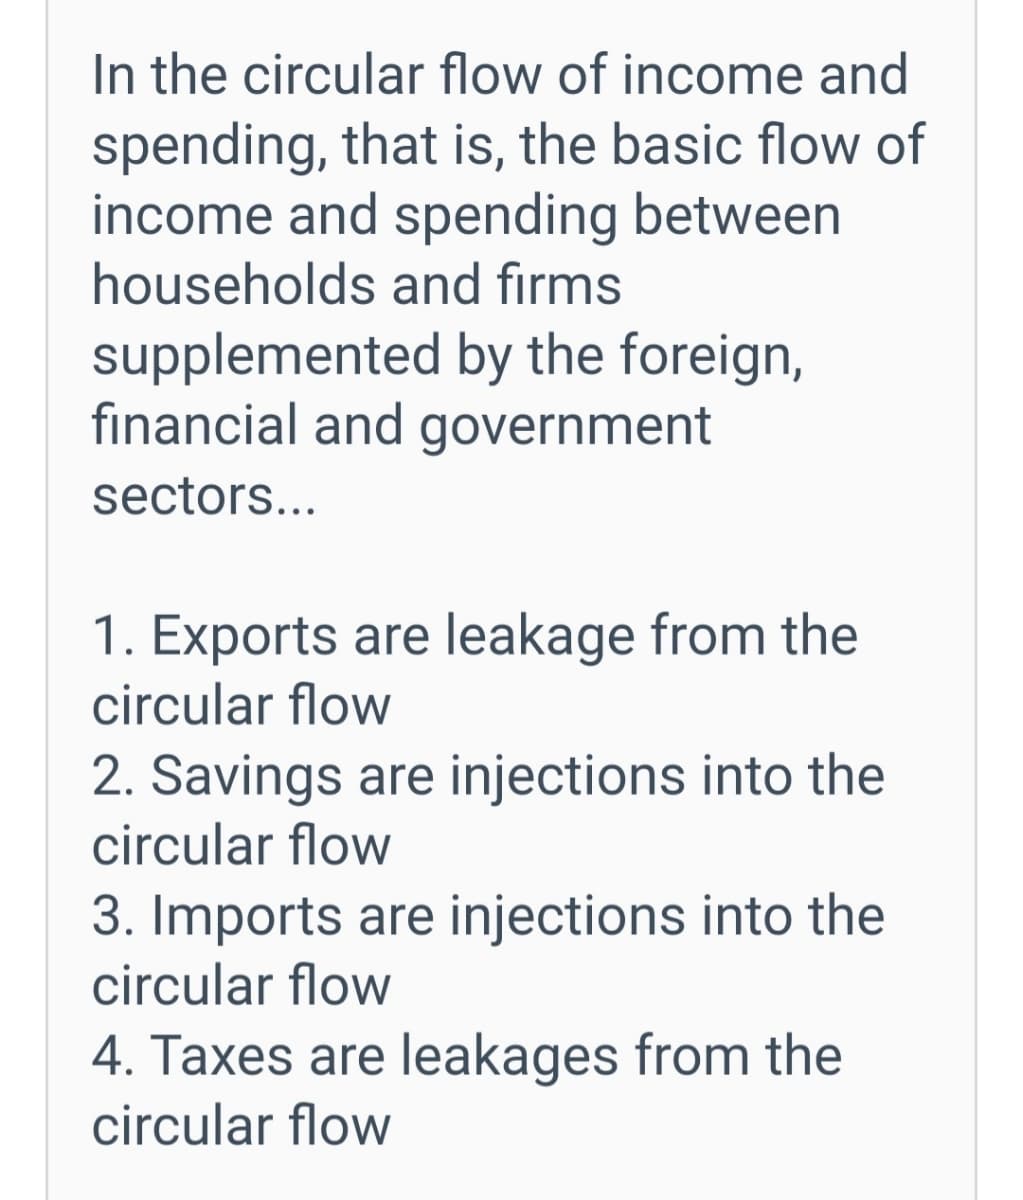 In the circular flow of income and
spending, that is, the basic flow of
income and spending between
households and firms
supplemented by the foreign,
financial and government
sectors...
1. Exports are leakage from the
circular flow
2. Savings are injections into the
circular flow
3. Imports are injections into the
circular flow
4. Taxes are leakages from the
circular flow
